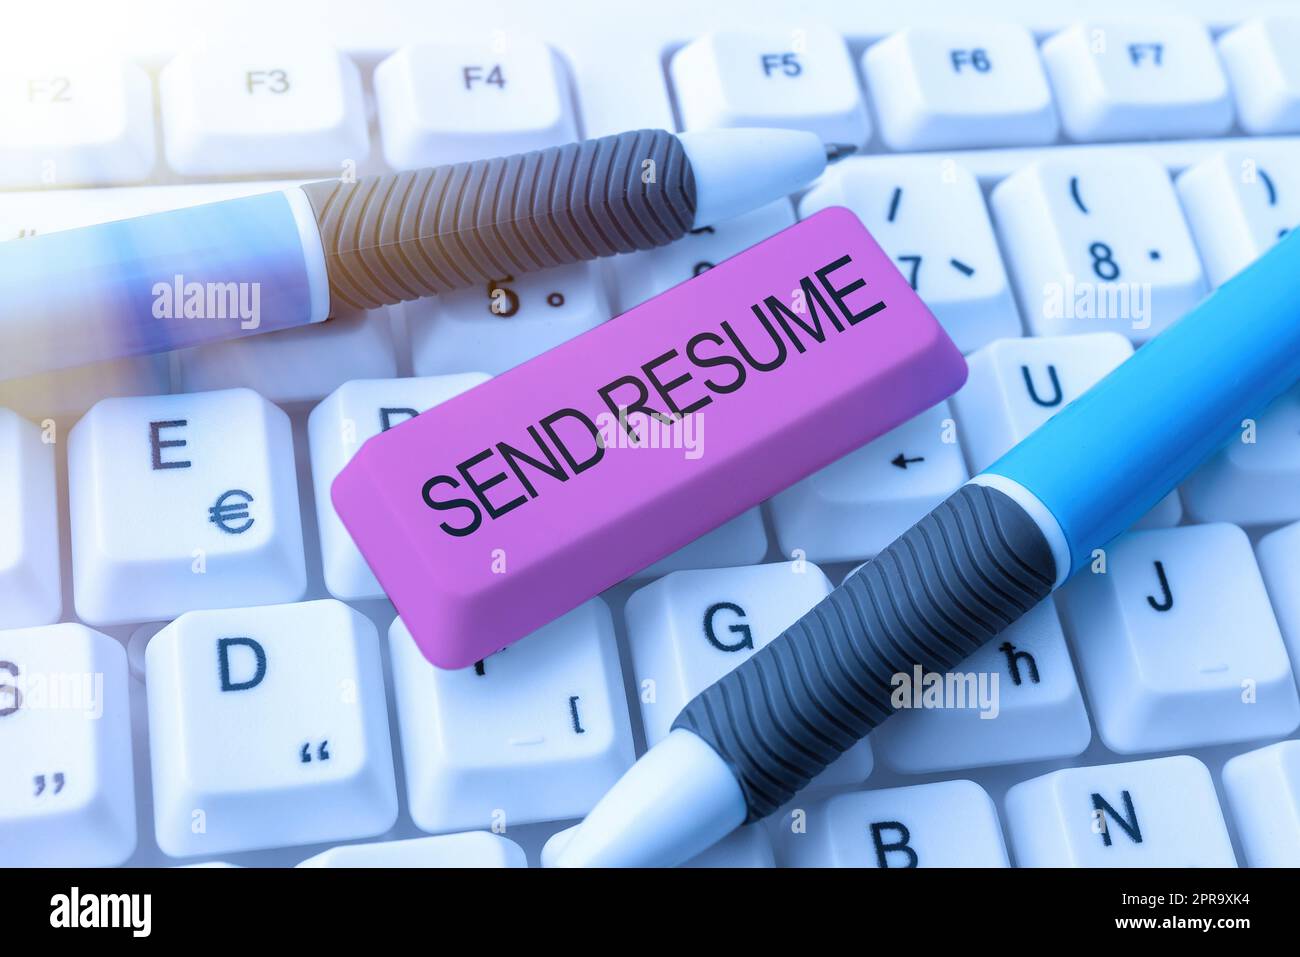 Writing displaying text Send Resume. Business approach brief account persons education qualifications and occupations -48646 Stock Photo